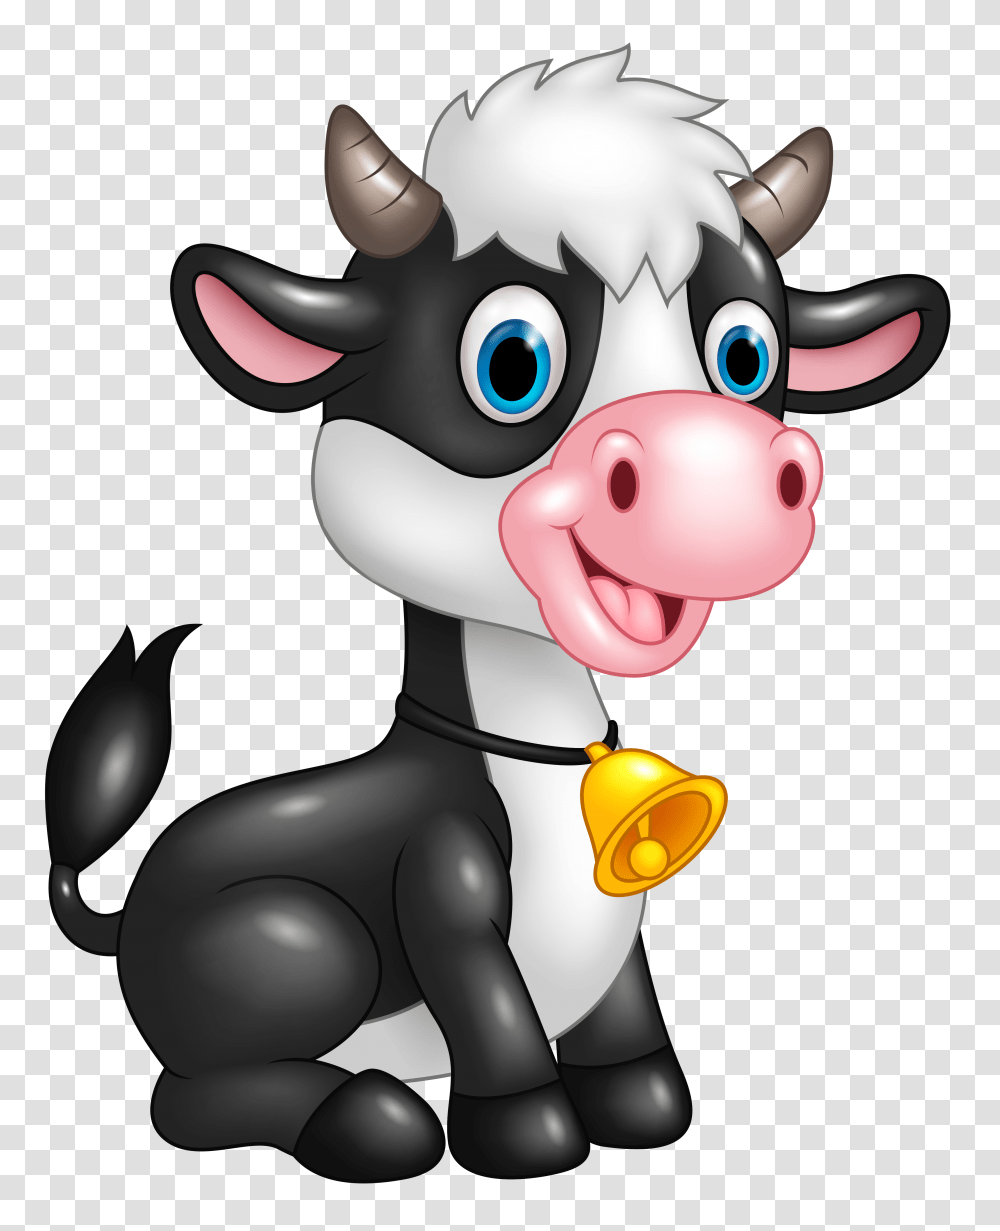 Tshirts Cute Cows Cartoon And Cow, Toy, Mammal, Animal, Cattle Transparent Png